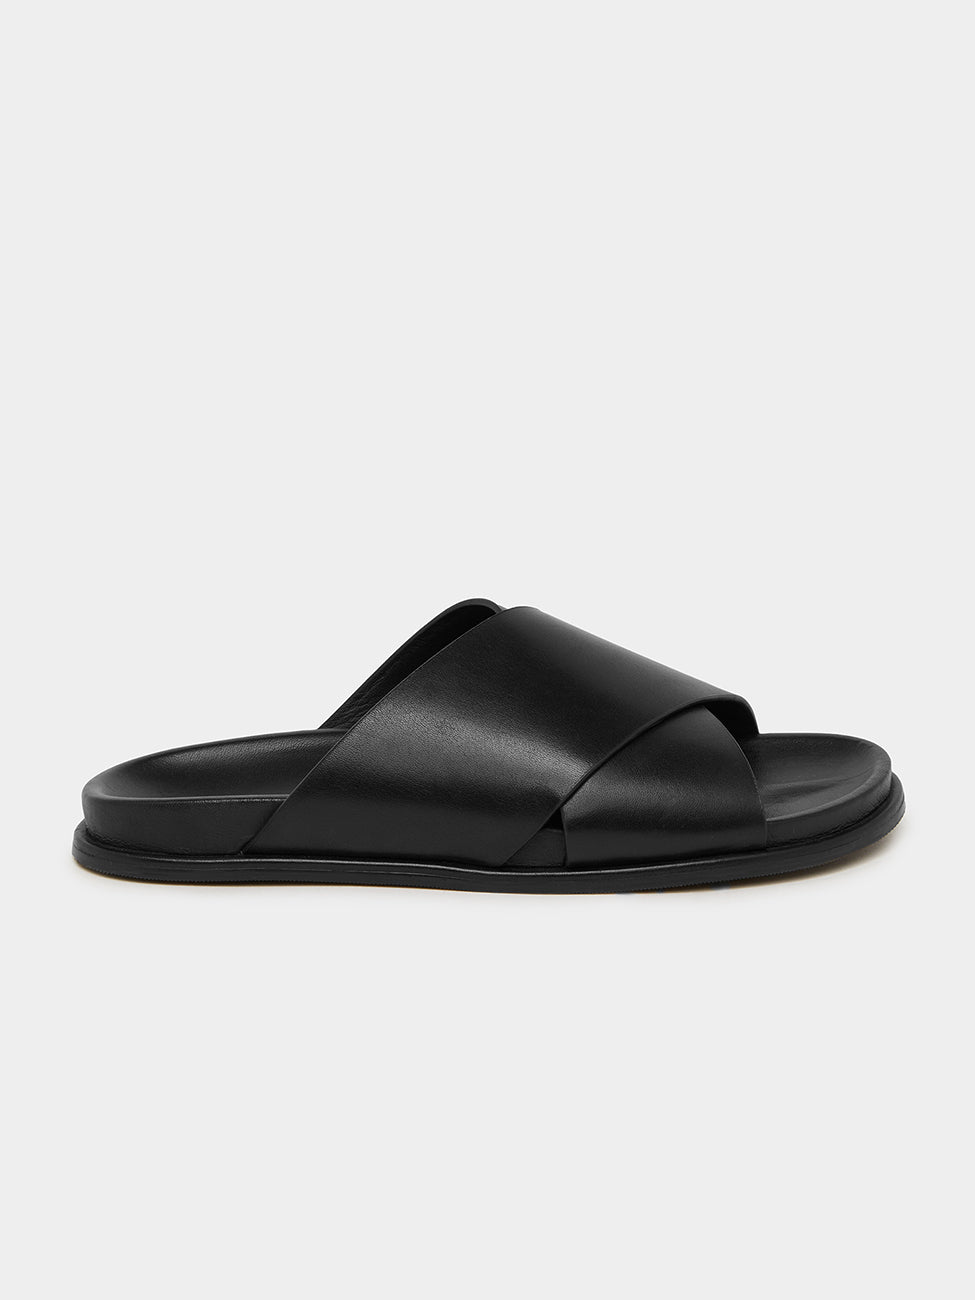 Assembly Label Crossover Slide in Black – Coco & Lola